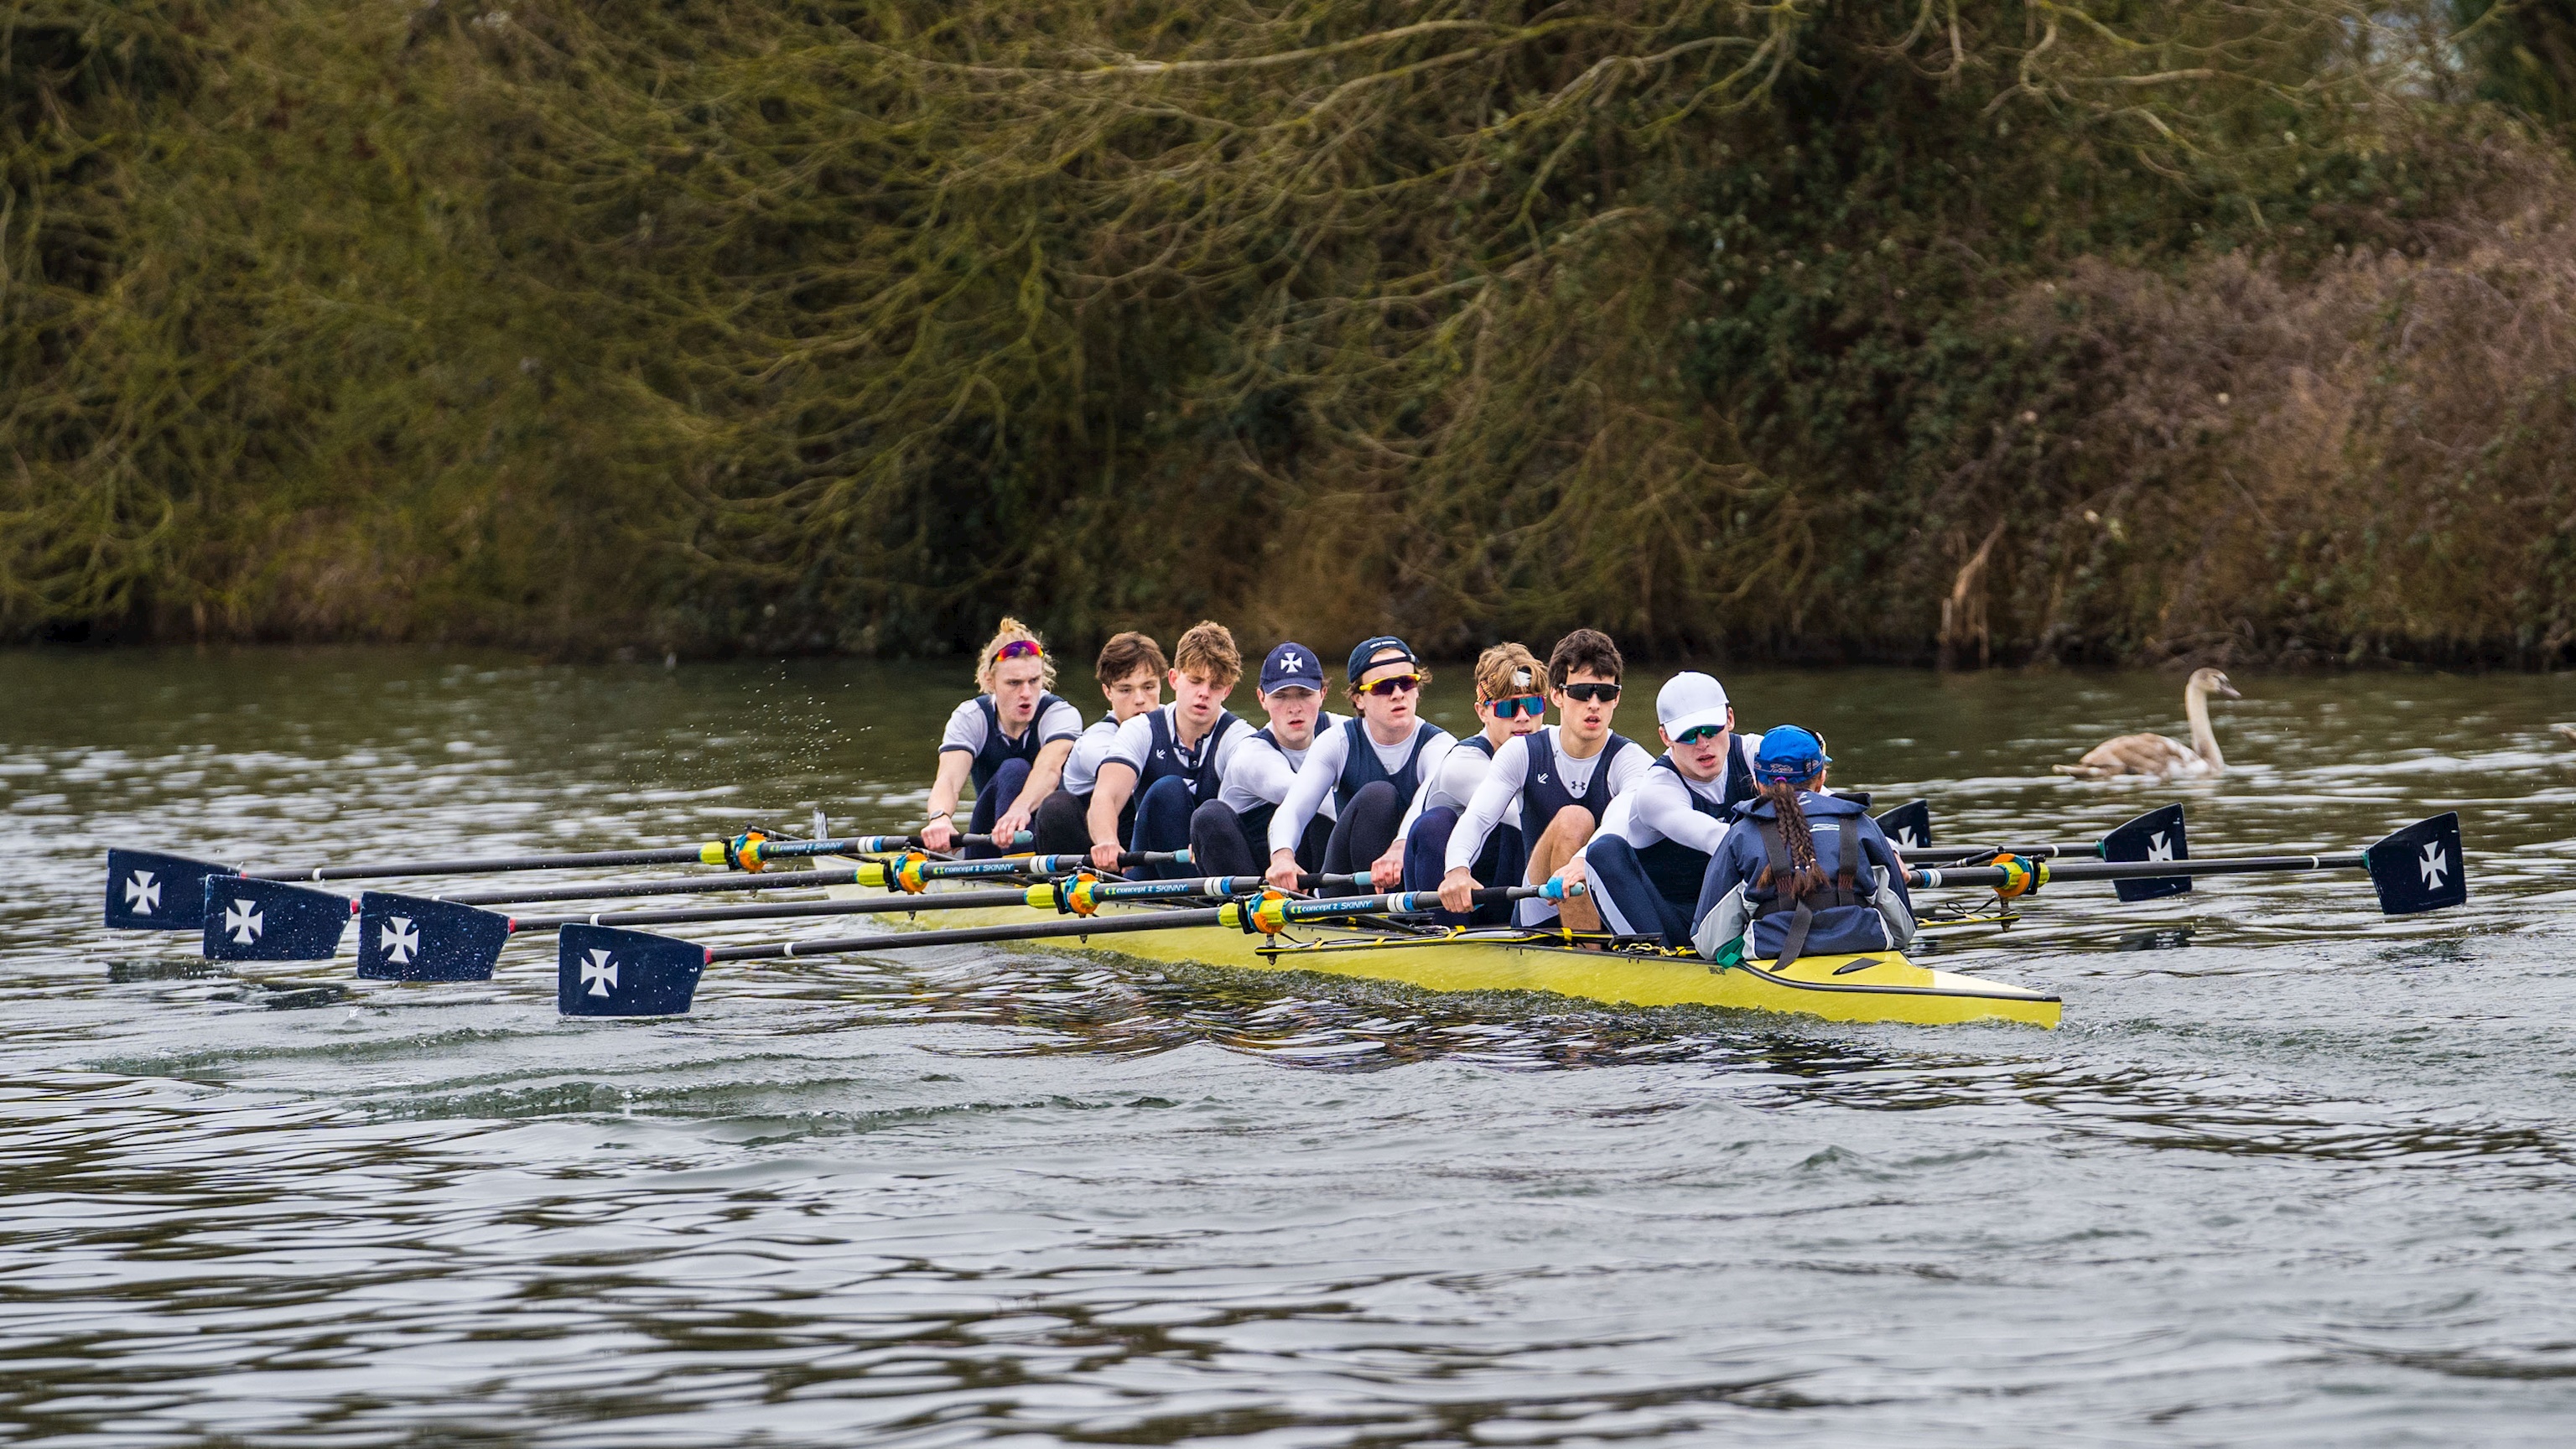 Podium finishes for rowers at Wycliffe Head event